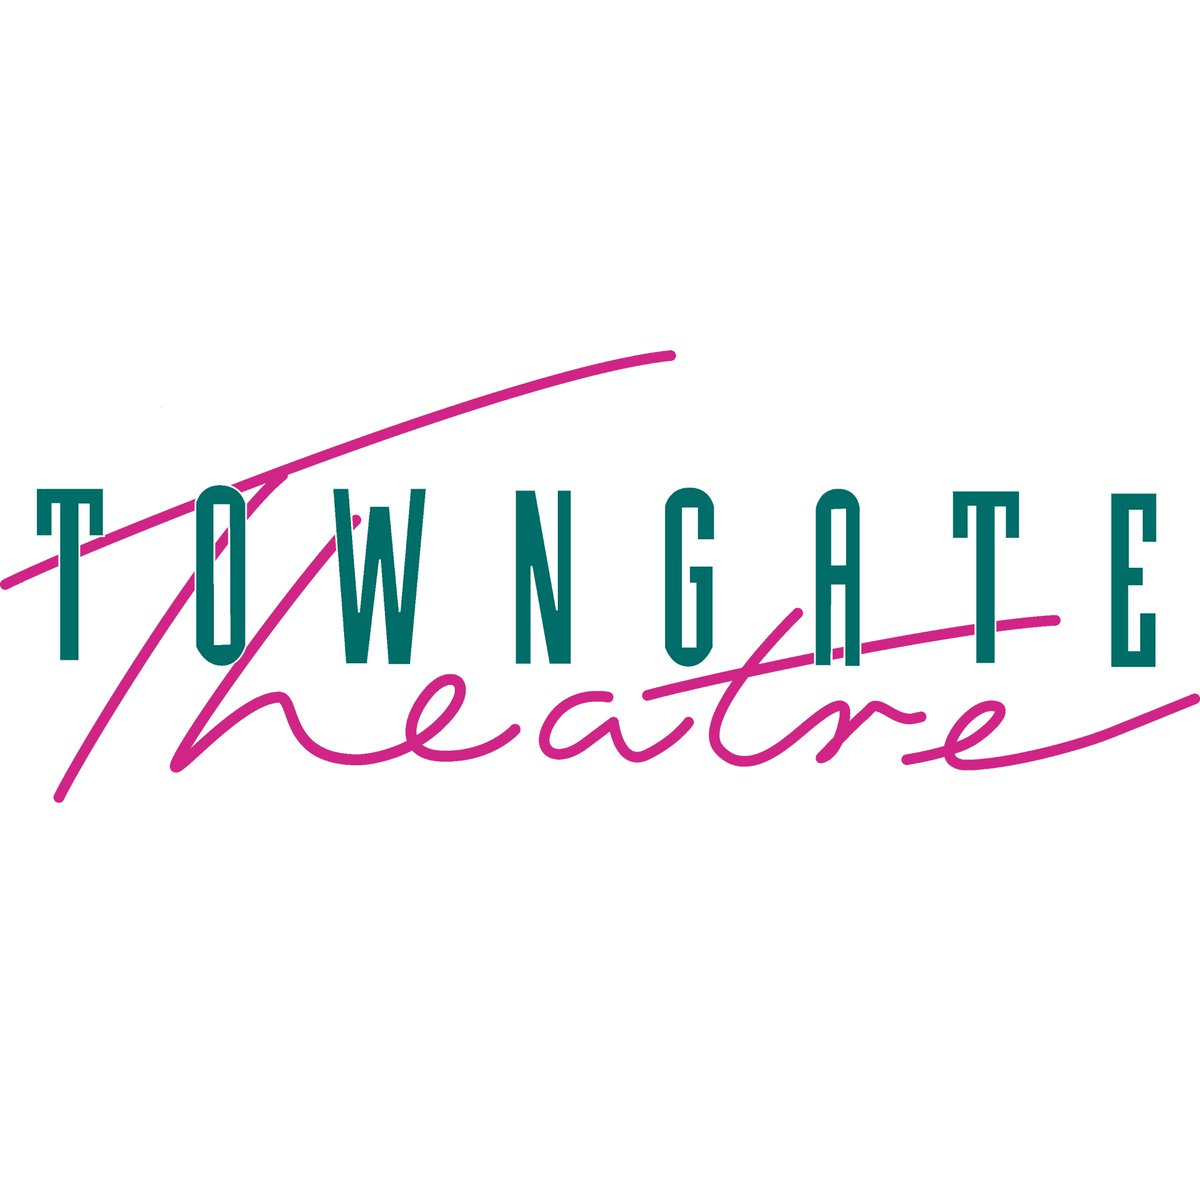 Louise Frankton from @TowngateTheatre with the weekly roundup next on drivetime with Johnny! Tune in on FM or online gateway978.com/live